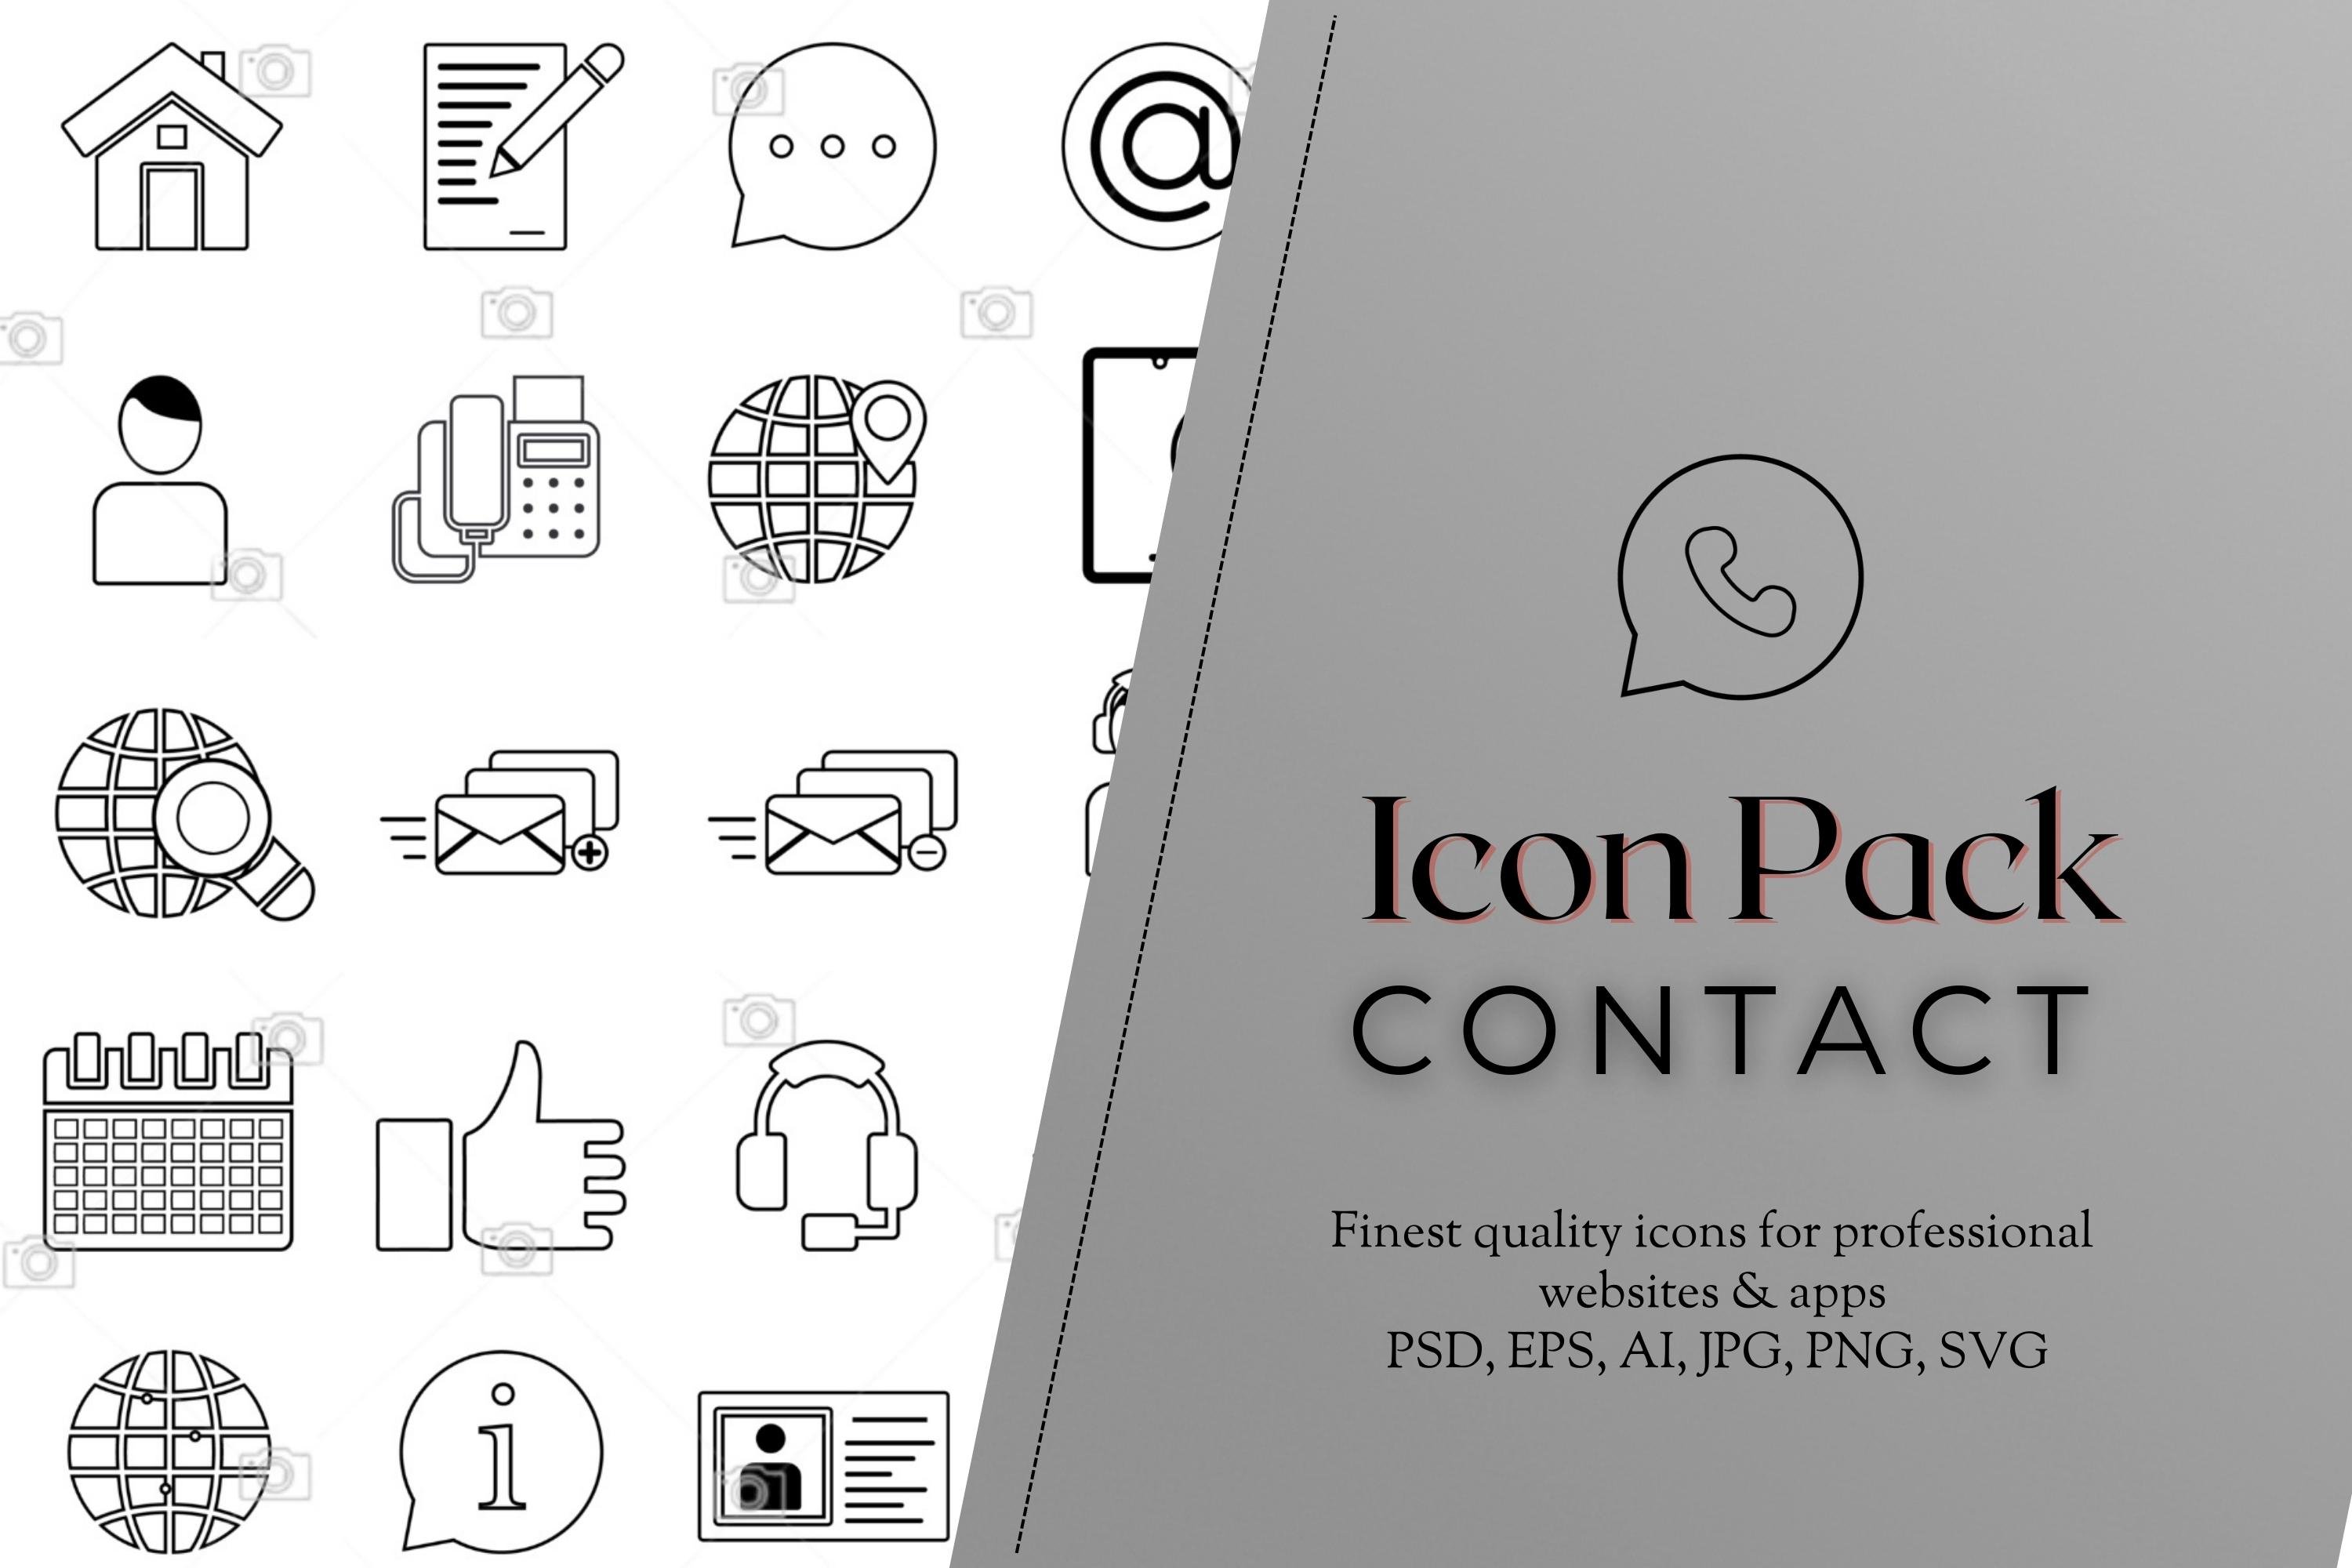 50 Contact Us Icon Set cover image.